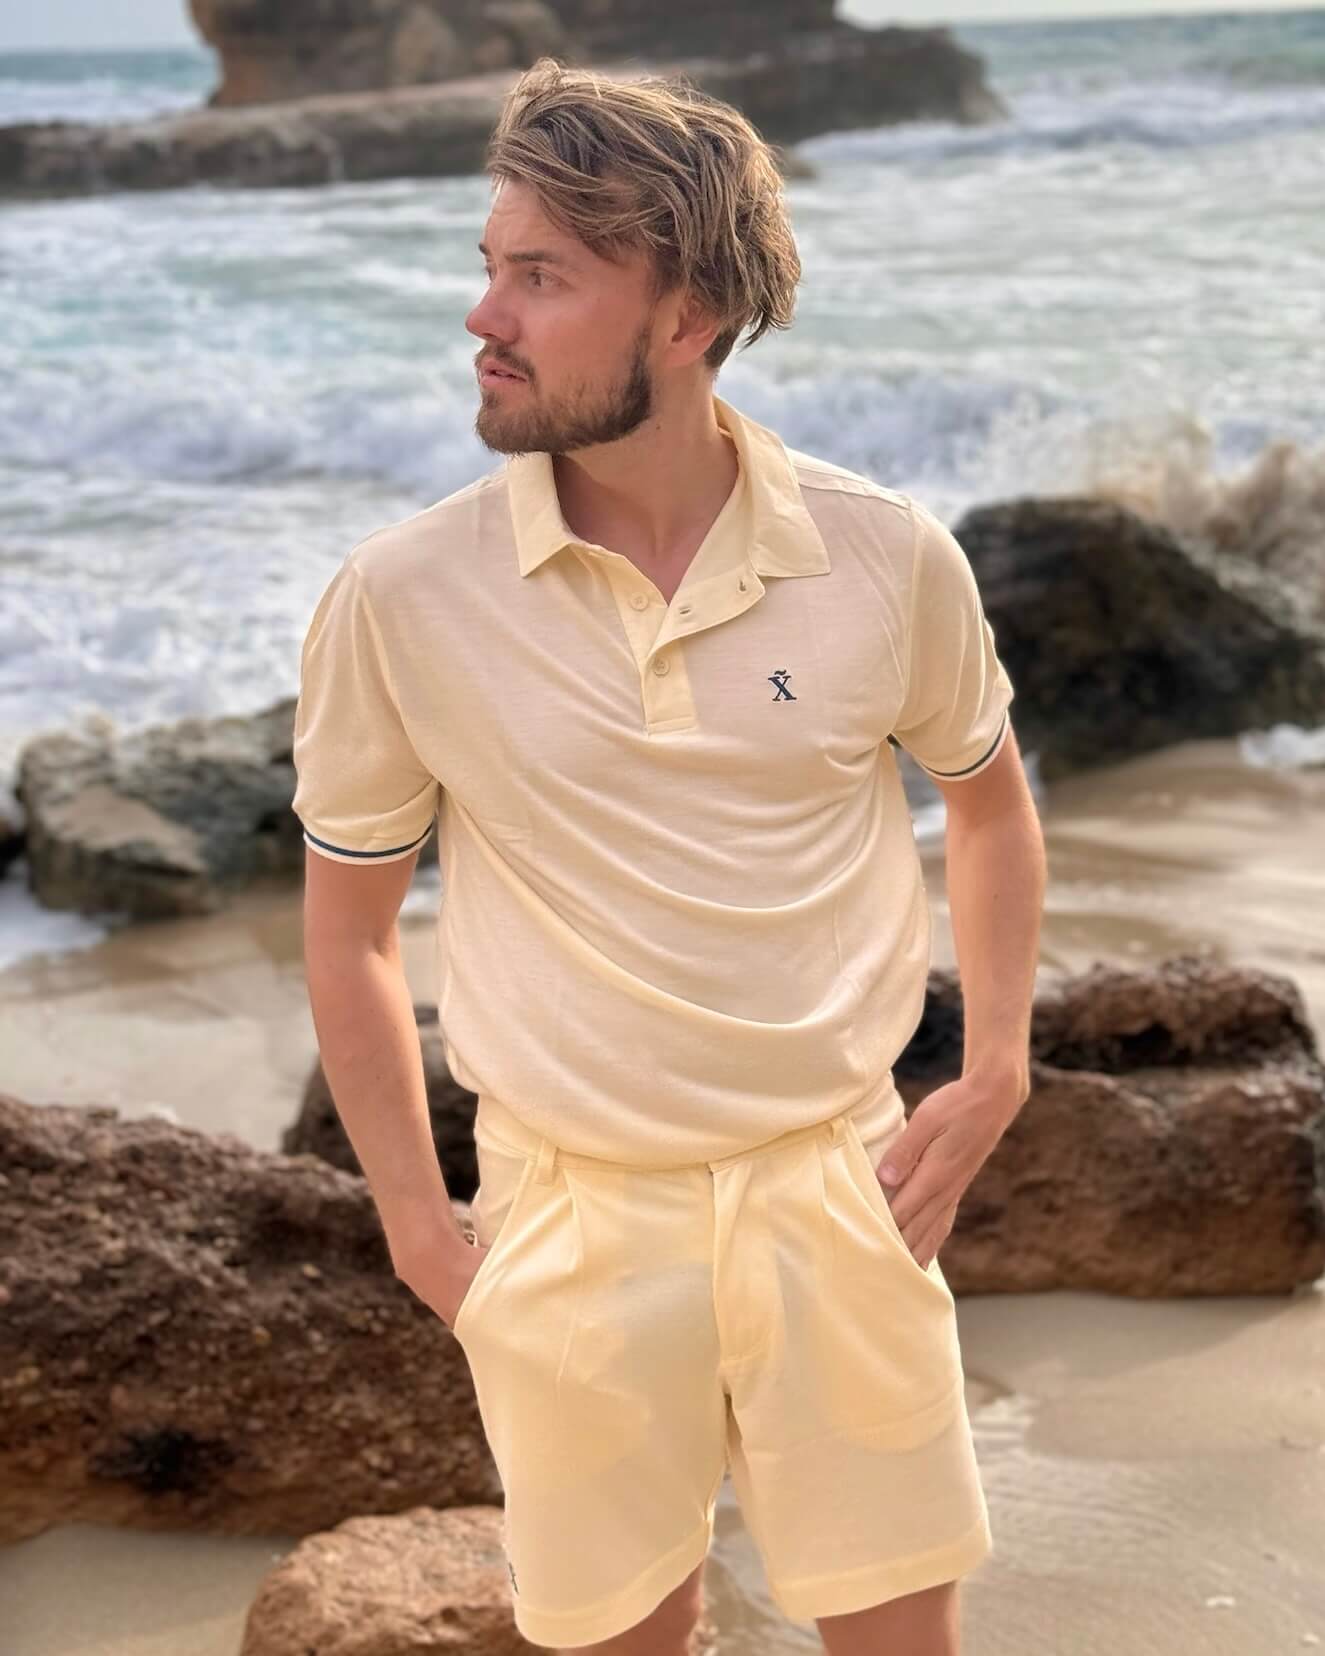 Beige Nature Polo | Men's golf polo shirt made from TENCEL™